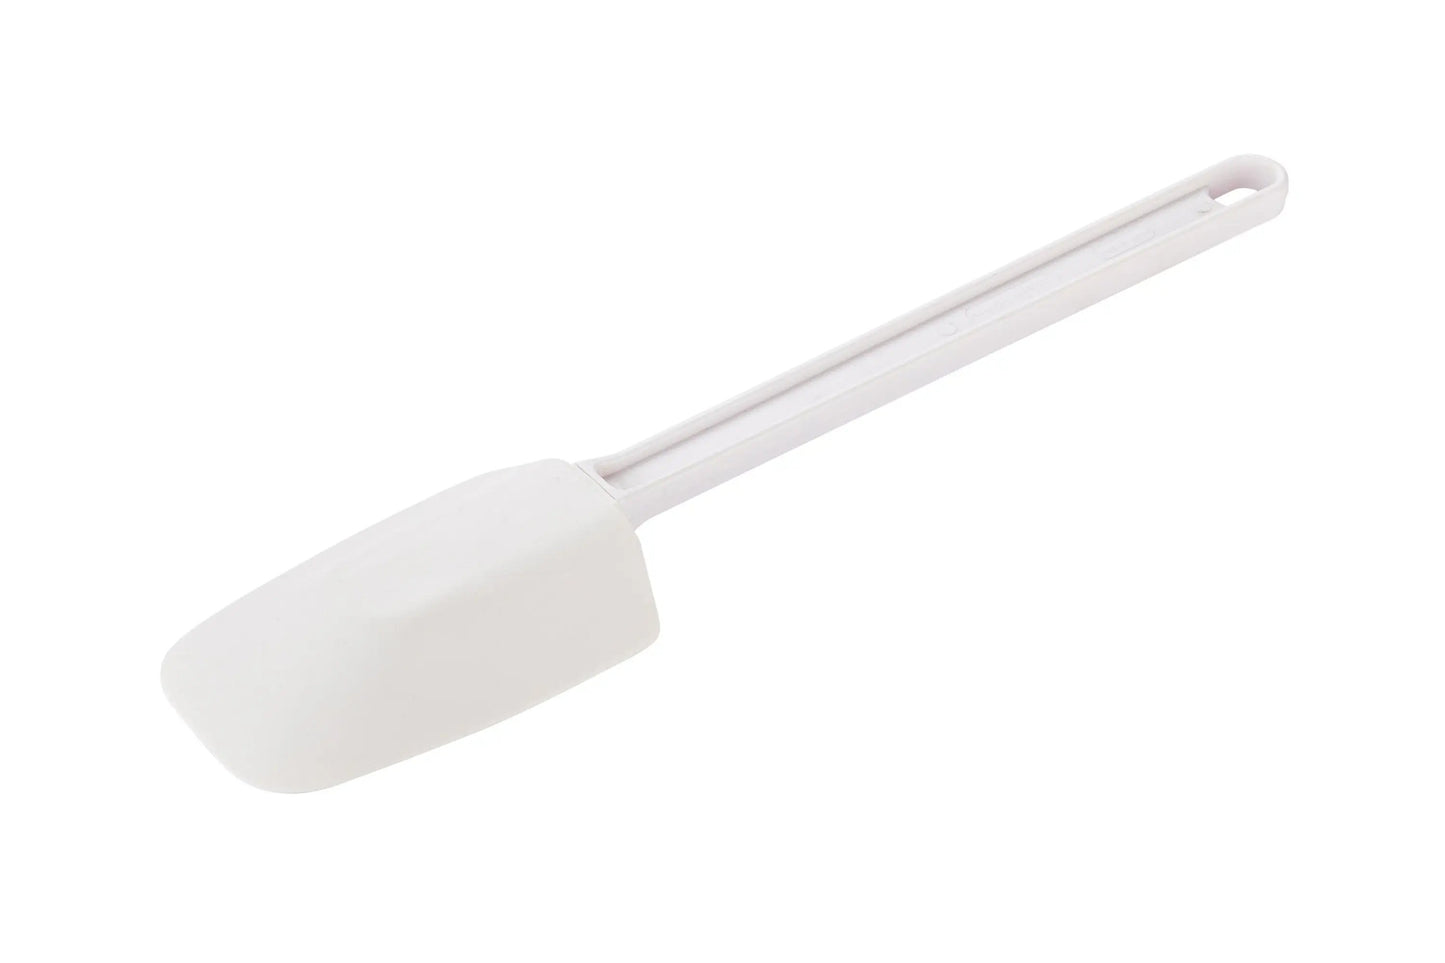 Met Lux White Rubber Spatula - Spoon-Shaped - 14" x 3" x 1/2" - 1 count box